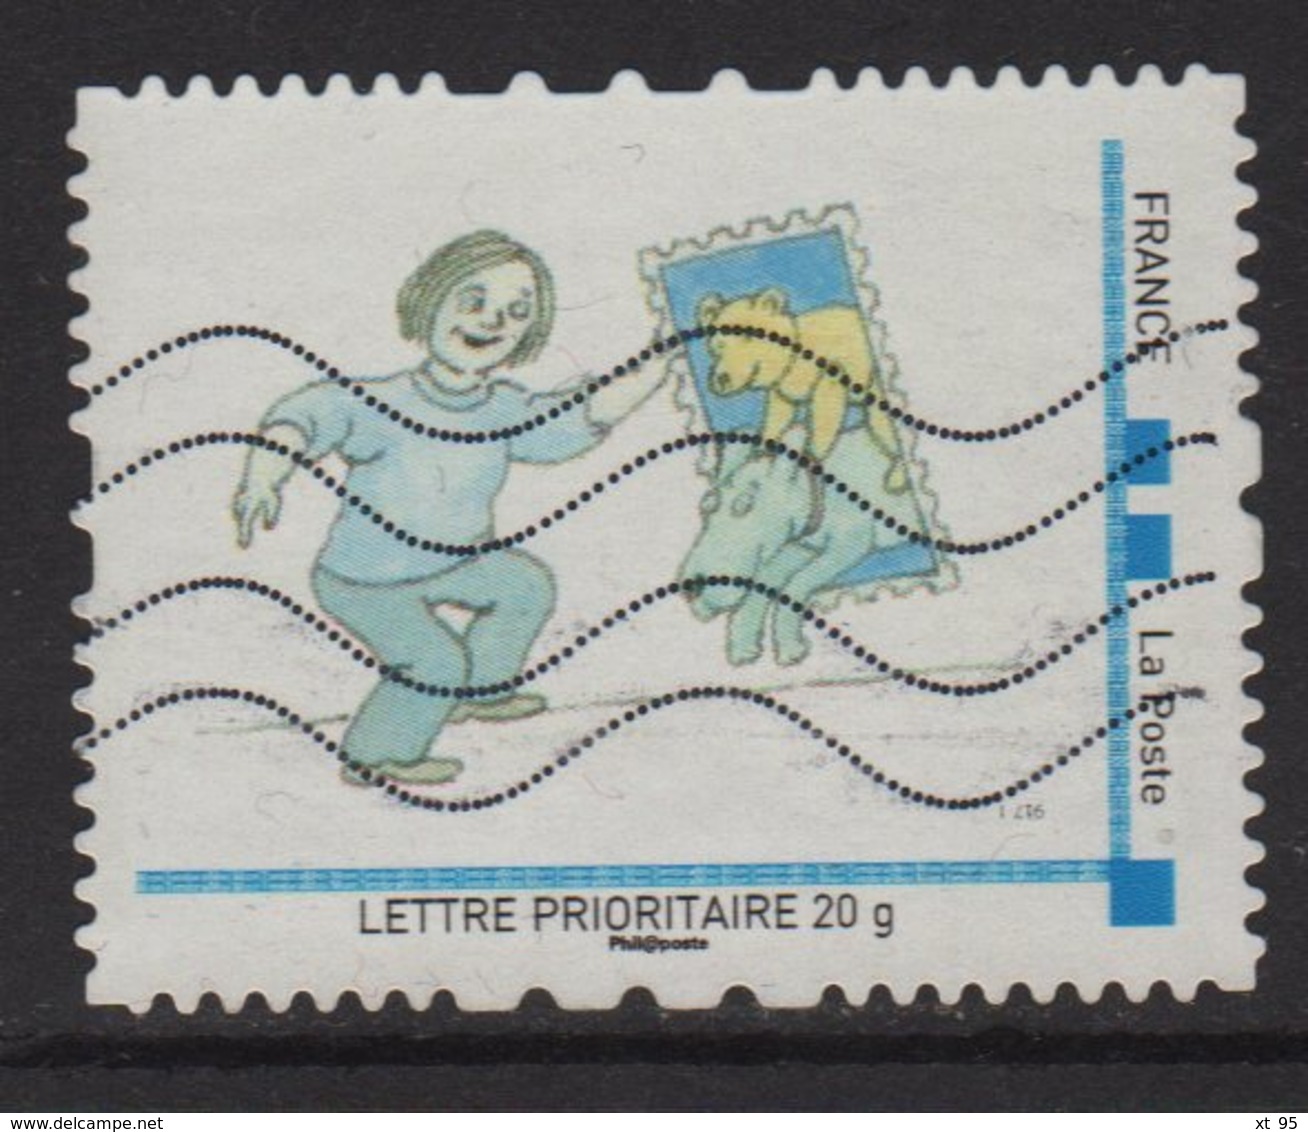 Timbre Personnalise Oblitere - Lettre Prioritaire 20g - Collectionnez Les Timbres - Usados